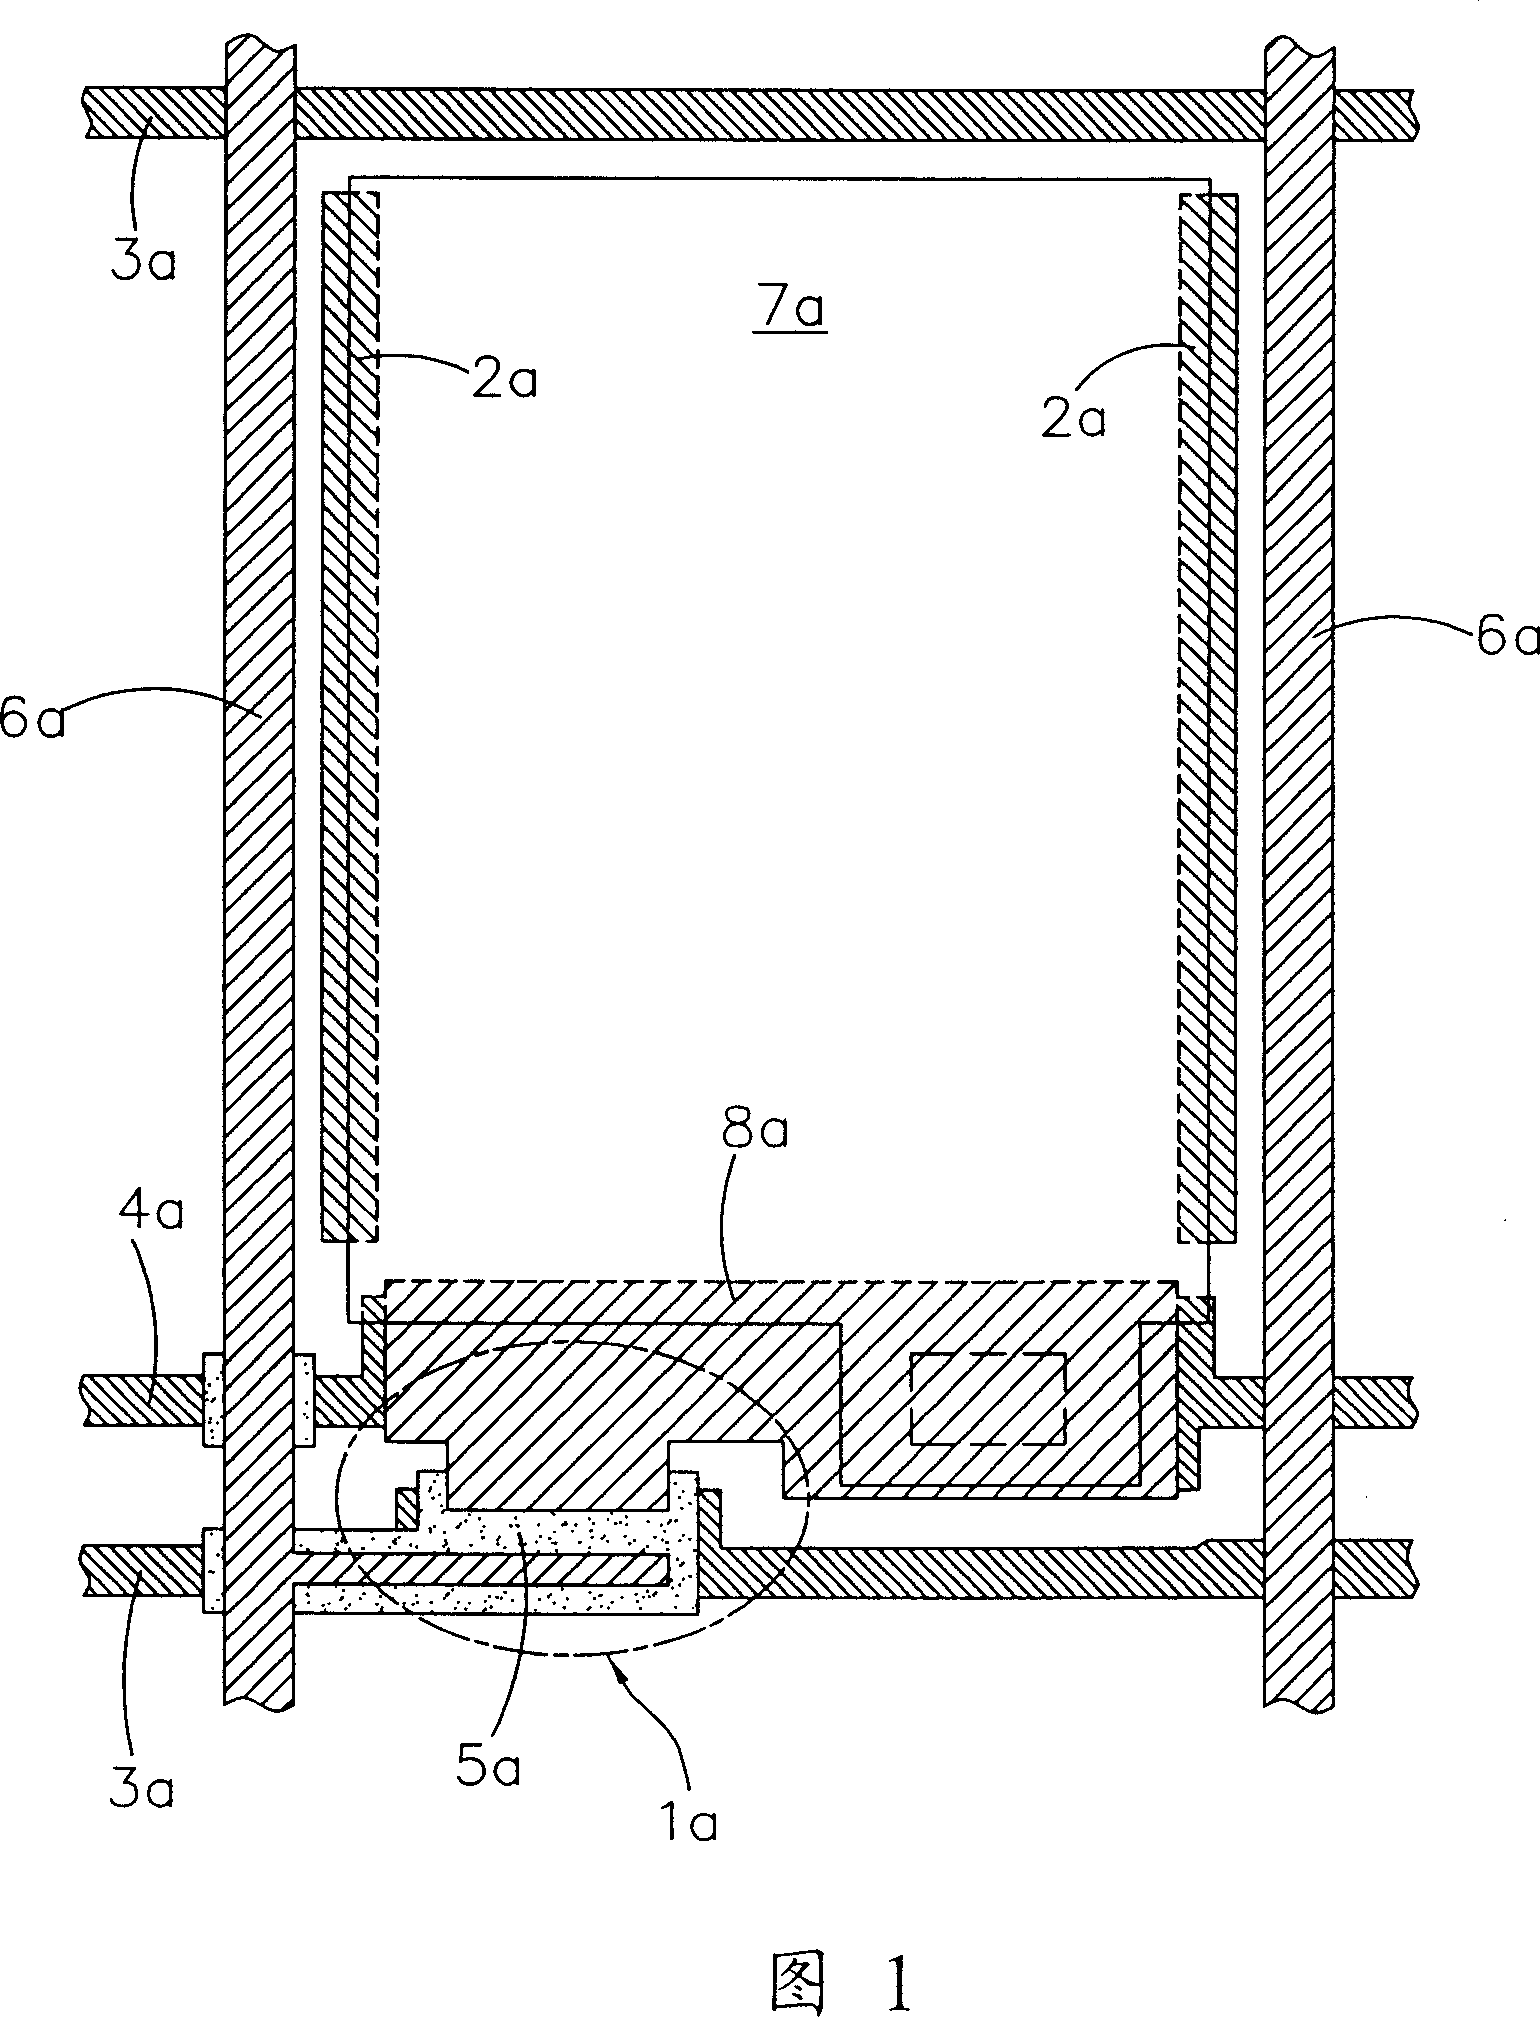 Pixel structure of thin film transistor liquid crystal display